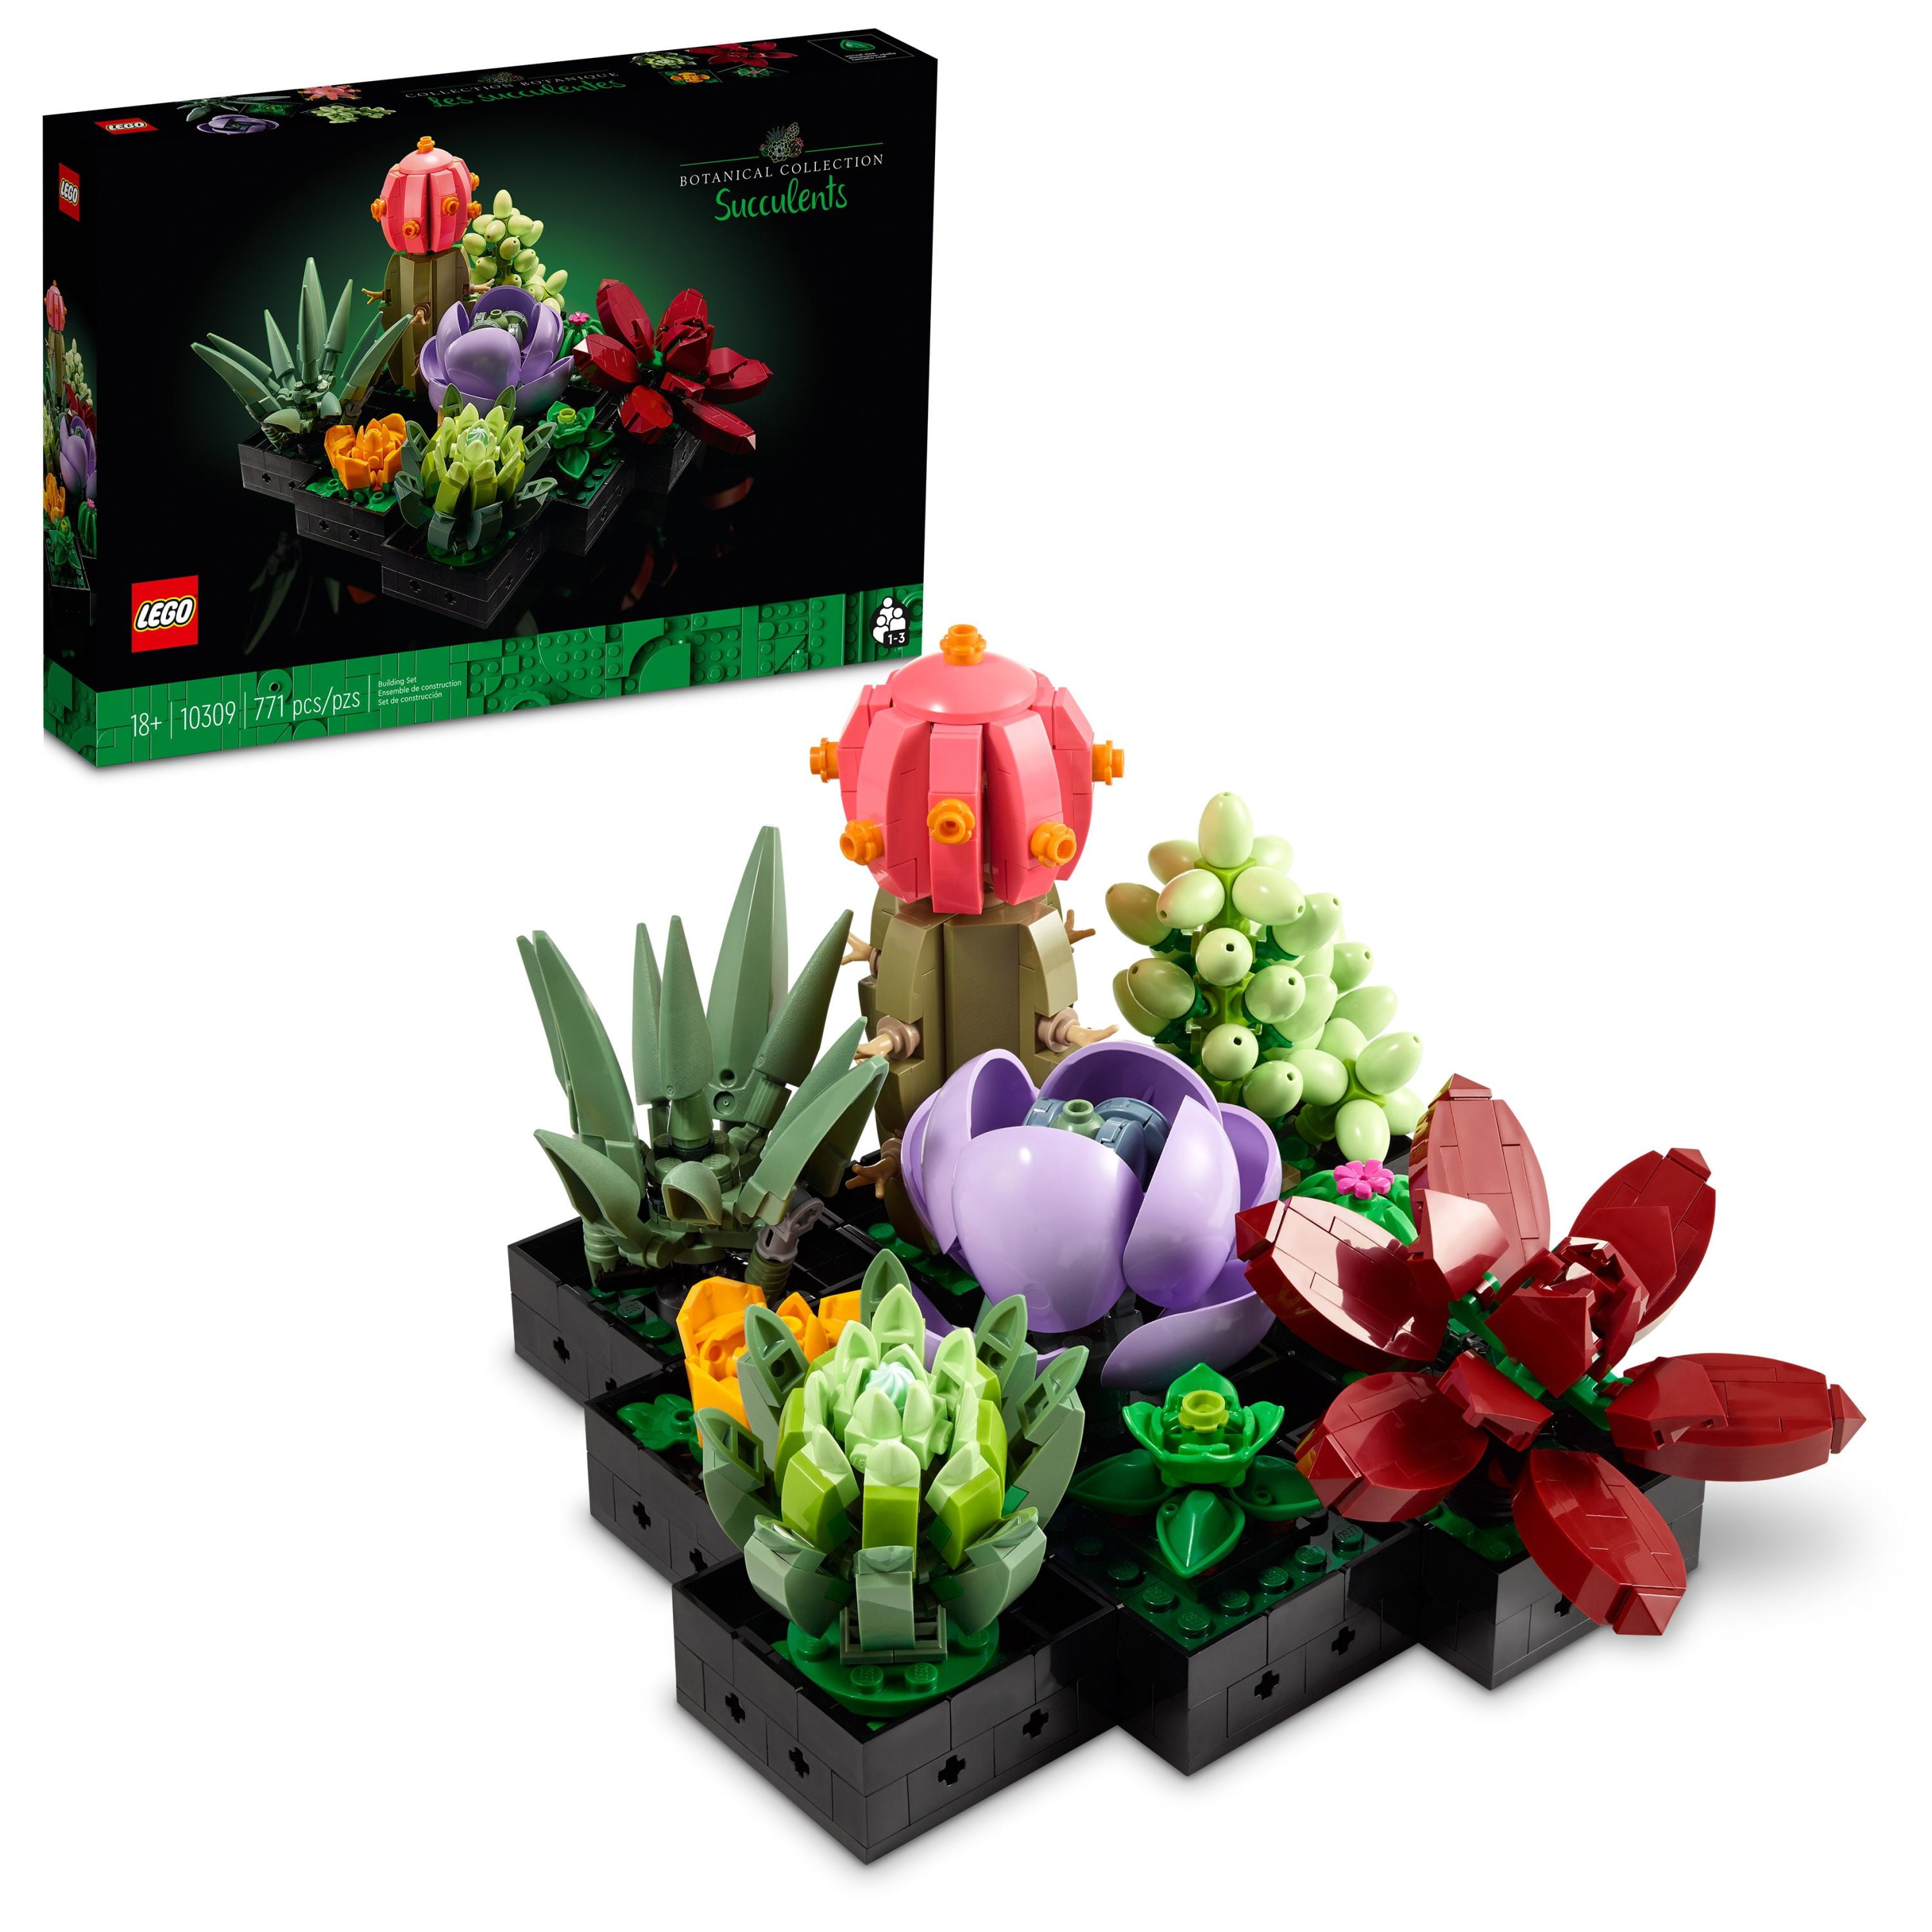 LEGO Icons Succulents 10309 Artificial Plants Set for Adults, Home Dcor, Birthday and Mother's Day Gift, Creative Housewarming Gifts, Botanical Collection